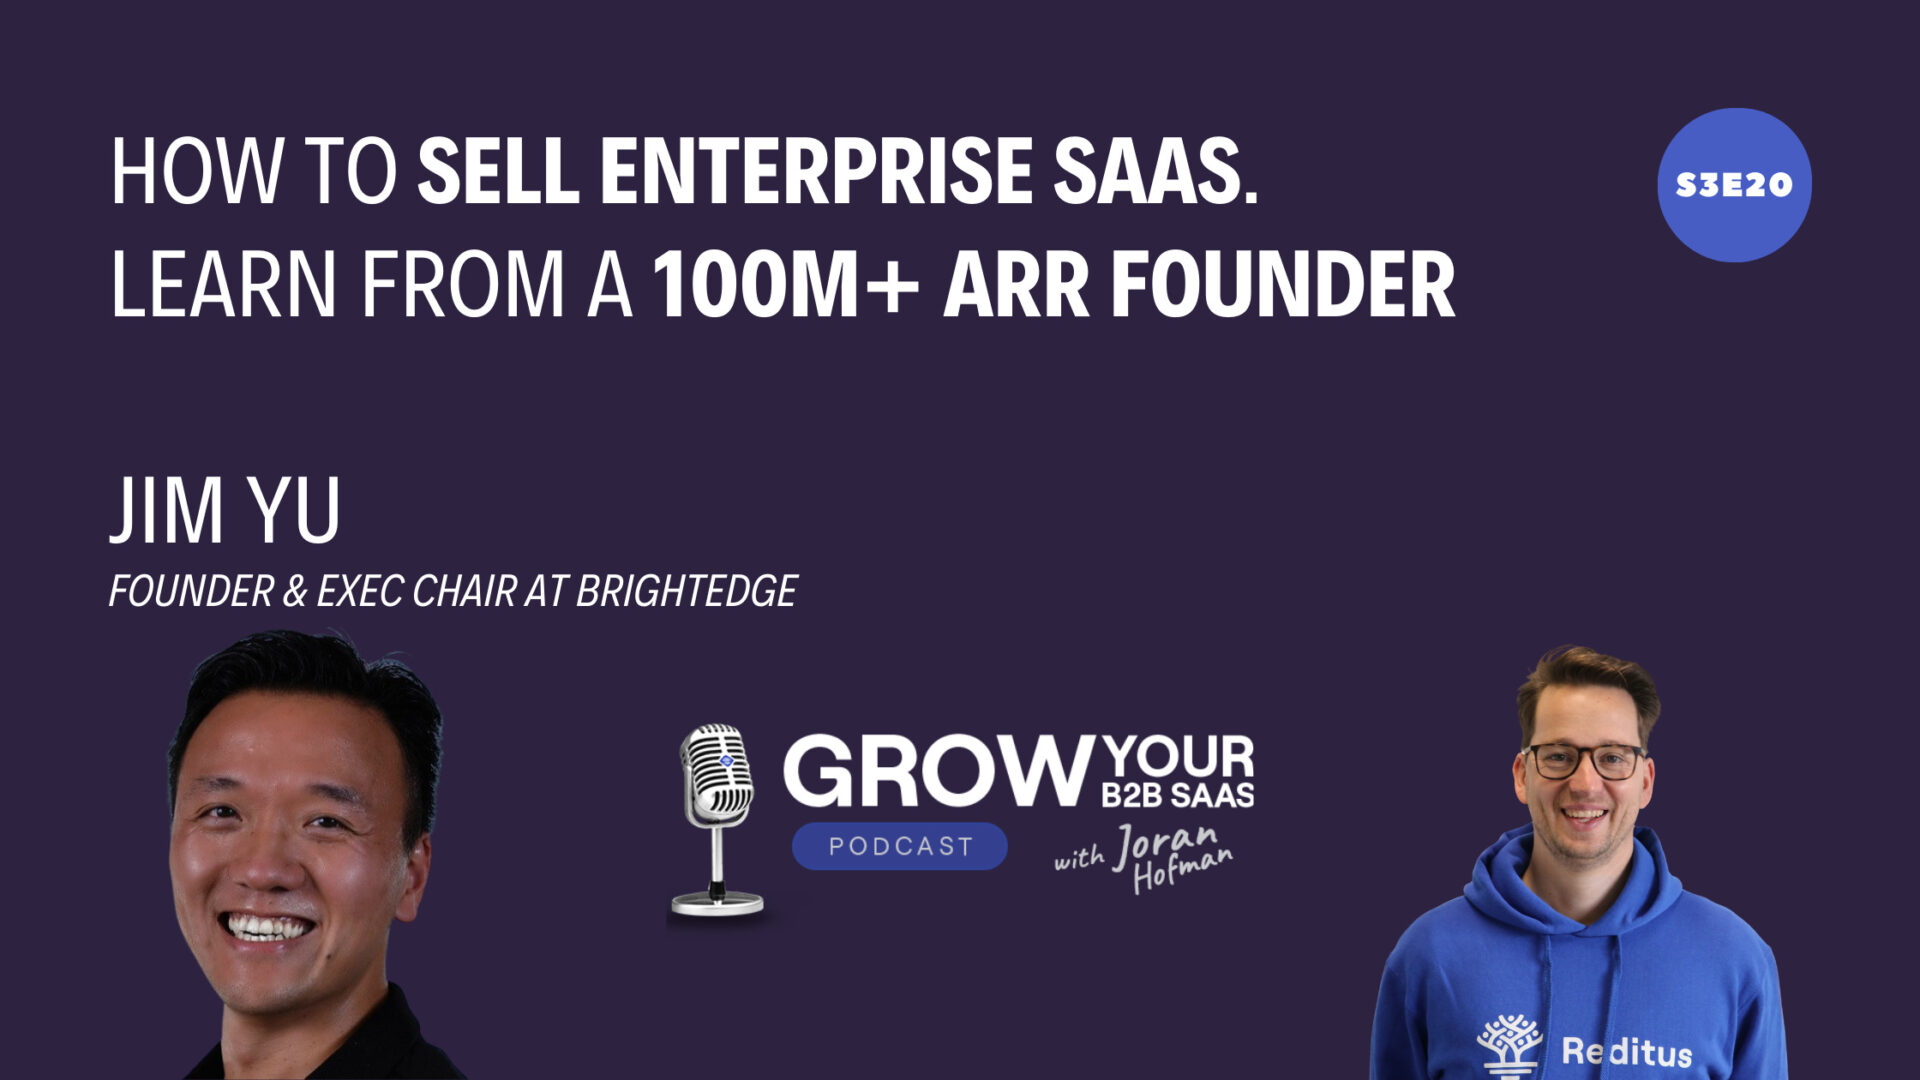 https://www.getreditus.com/podcast/s3e20-how-to-sell-enterprise-saas-learn-from-a-100m-arr-founder-with-jim-yu/